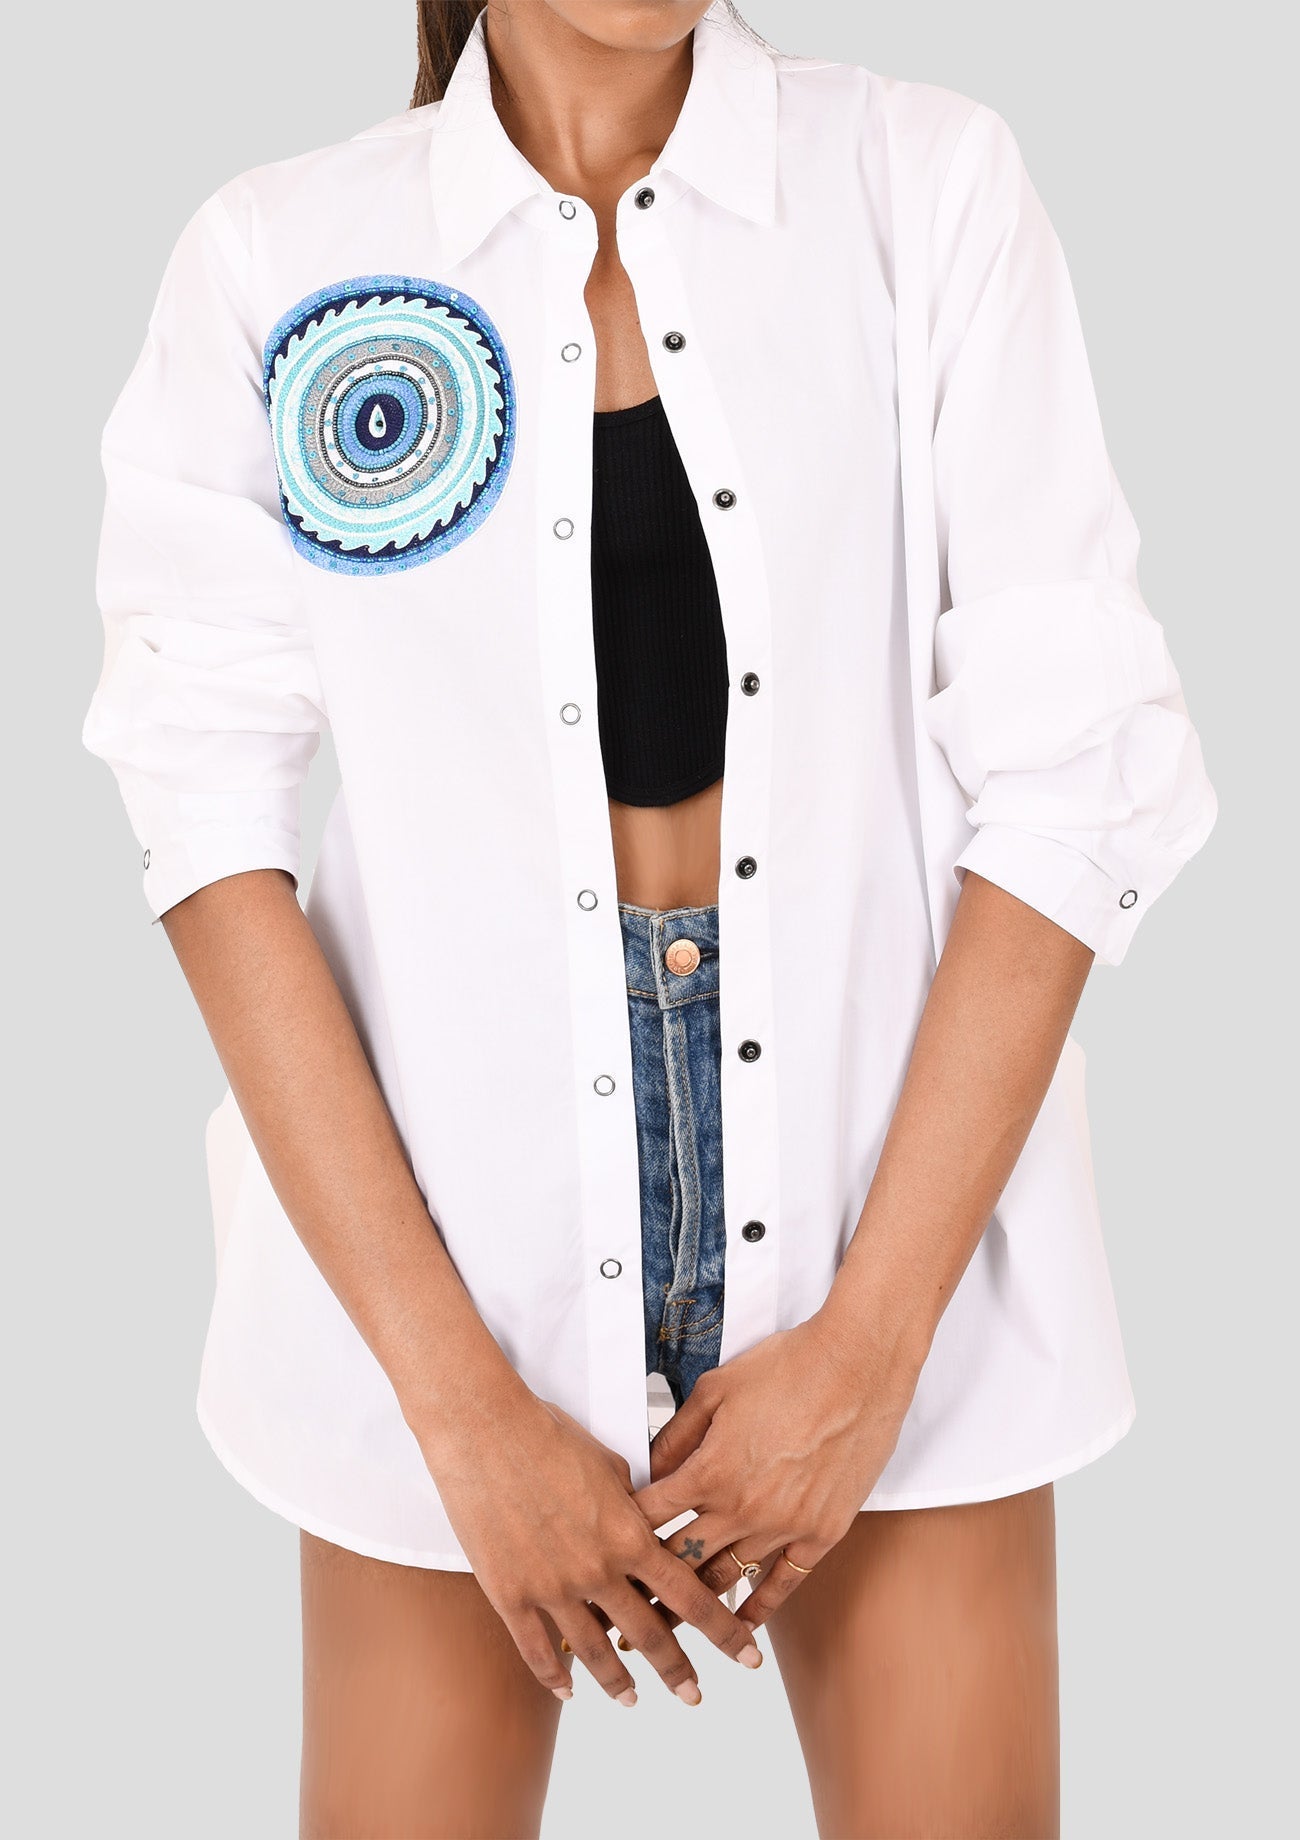 White Cotton Shirt With Circular Embroidered Evil Eye